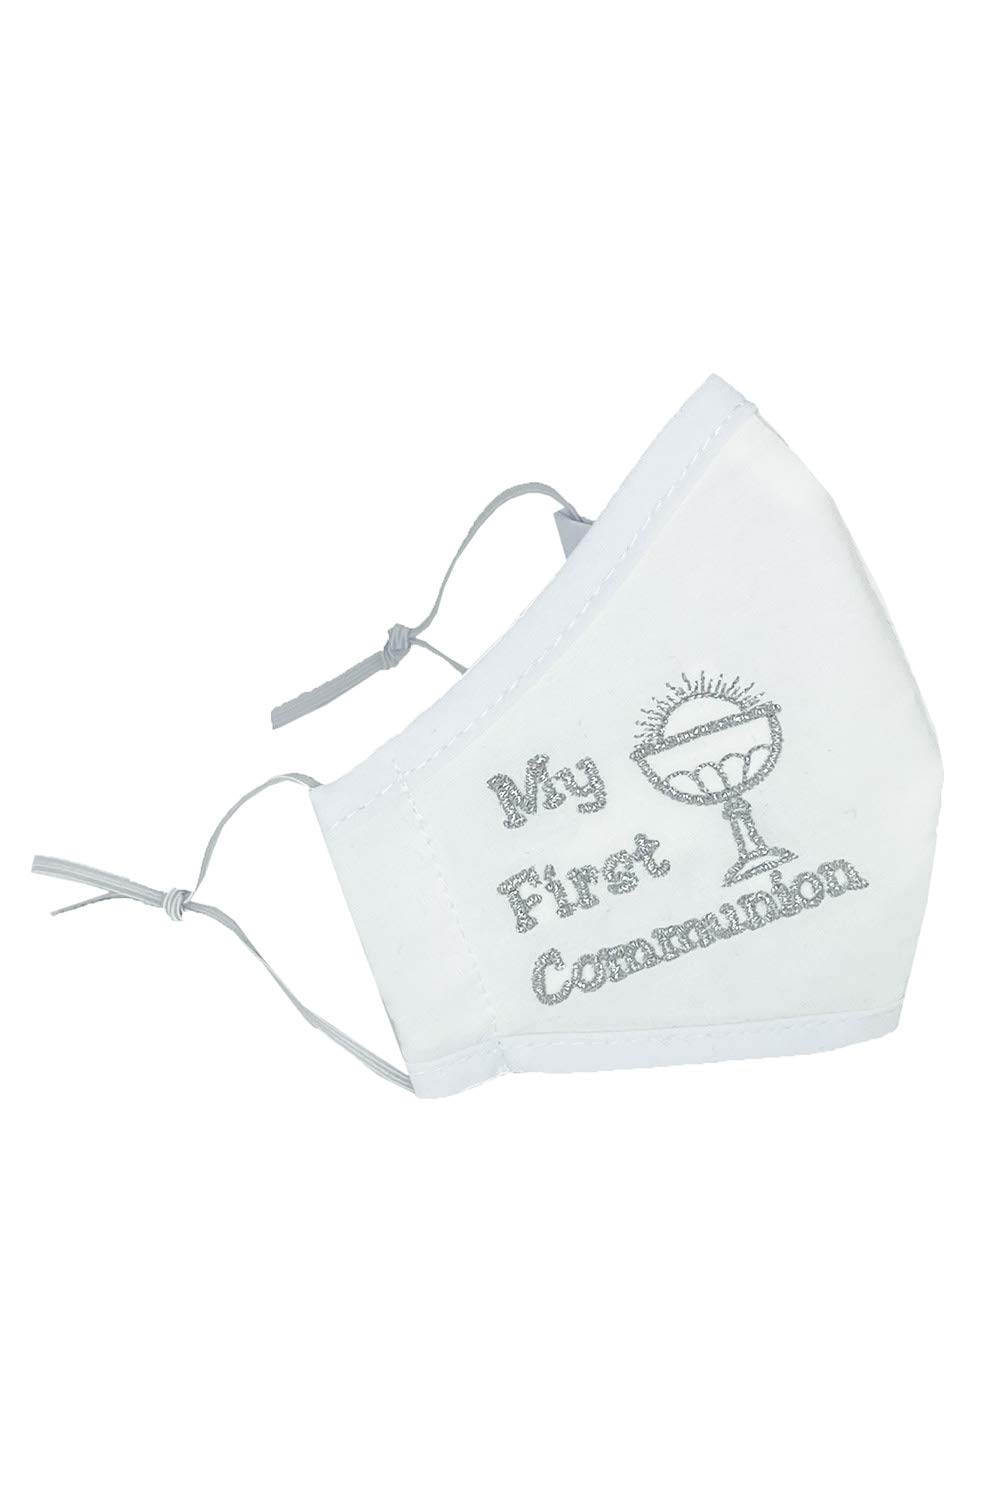 Pink Princess First Communion Face Mask for Kids - 100% Cotton Boys and Girls Masks - Made in USA